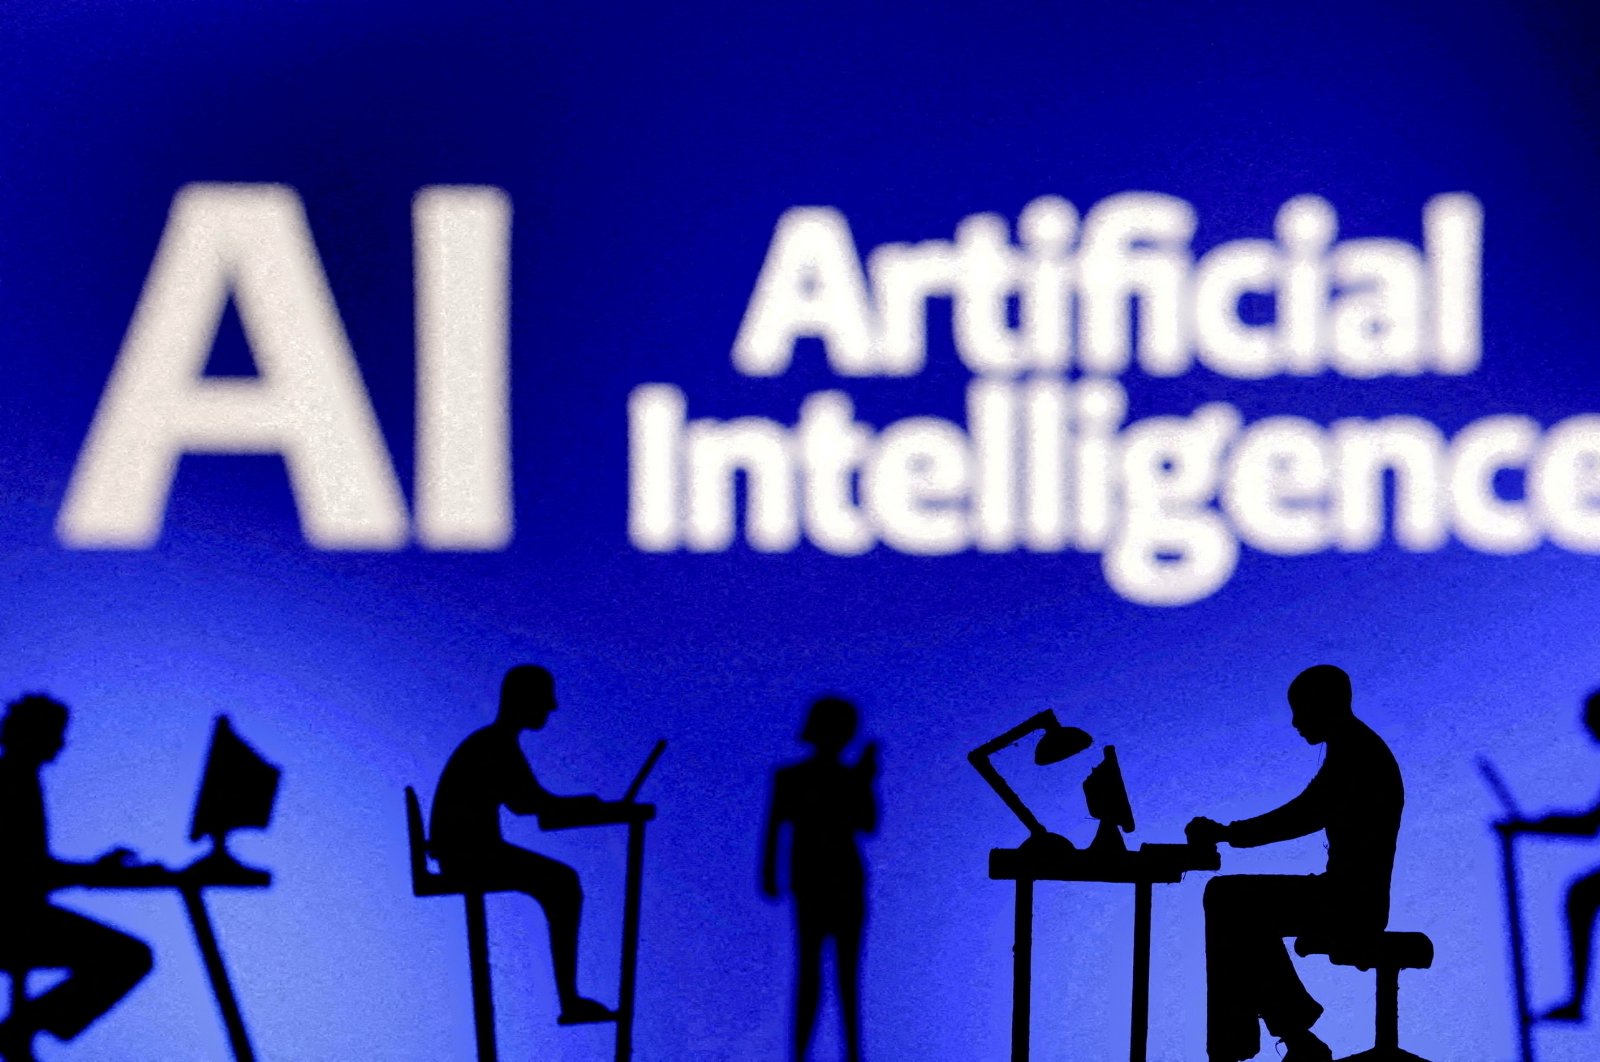 Figurines with computers and smartphones are seen in front of the words &quot;Artificial Intelligence AI&quot; in this illustration taken Feb. 19, 2024. (Reuters Photo)